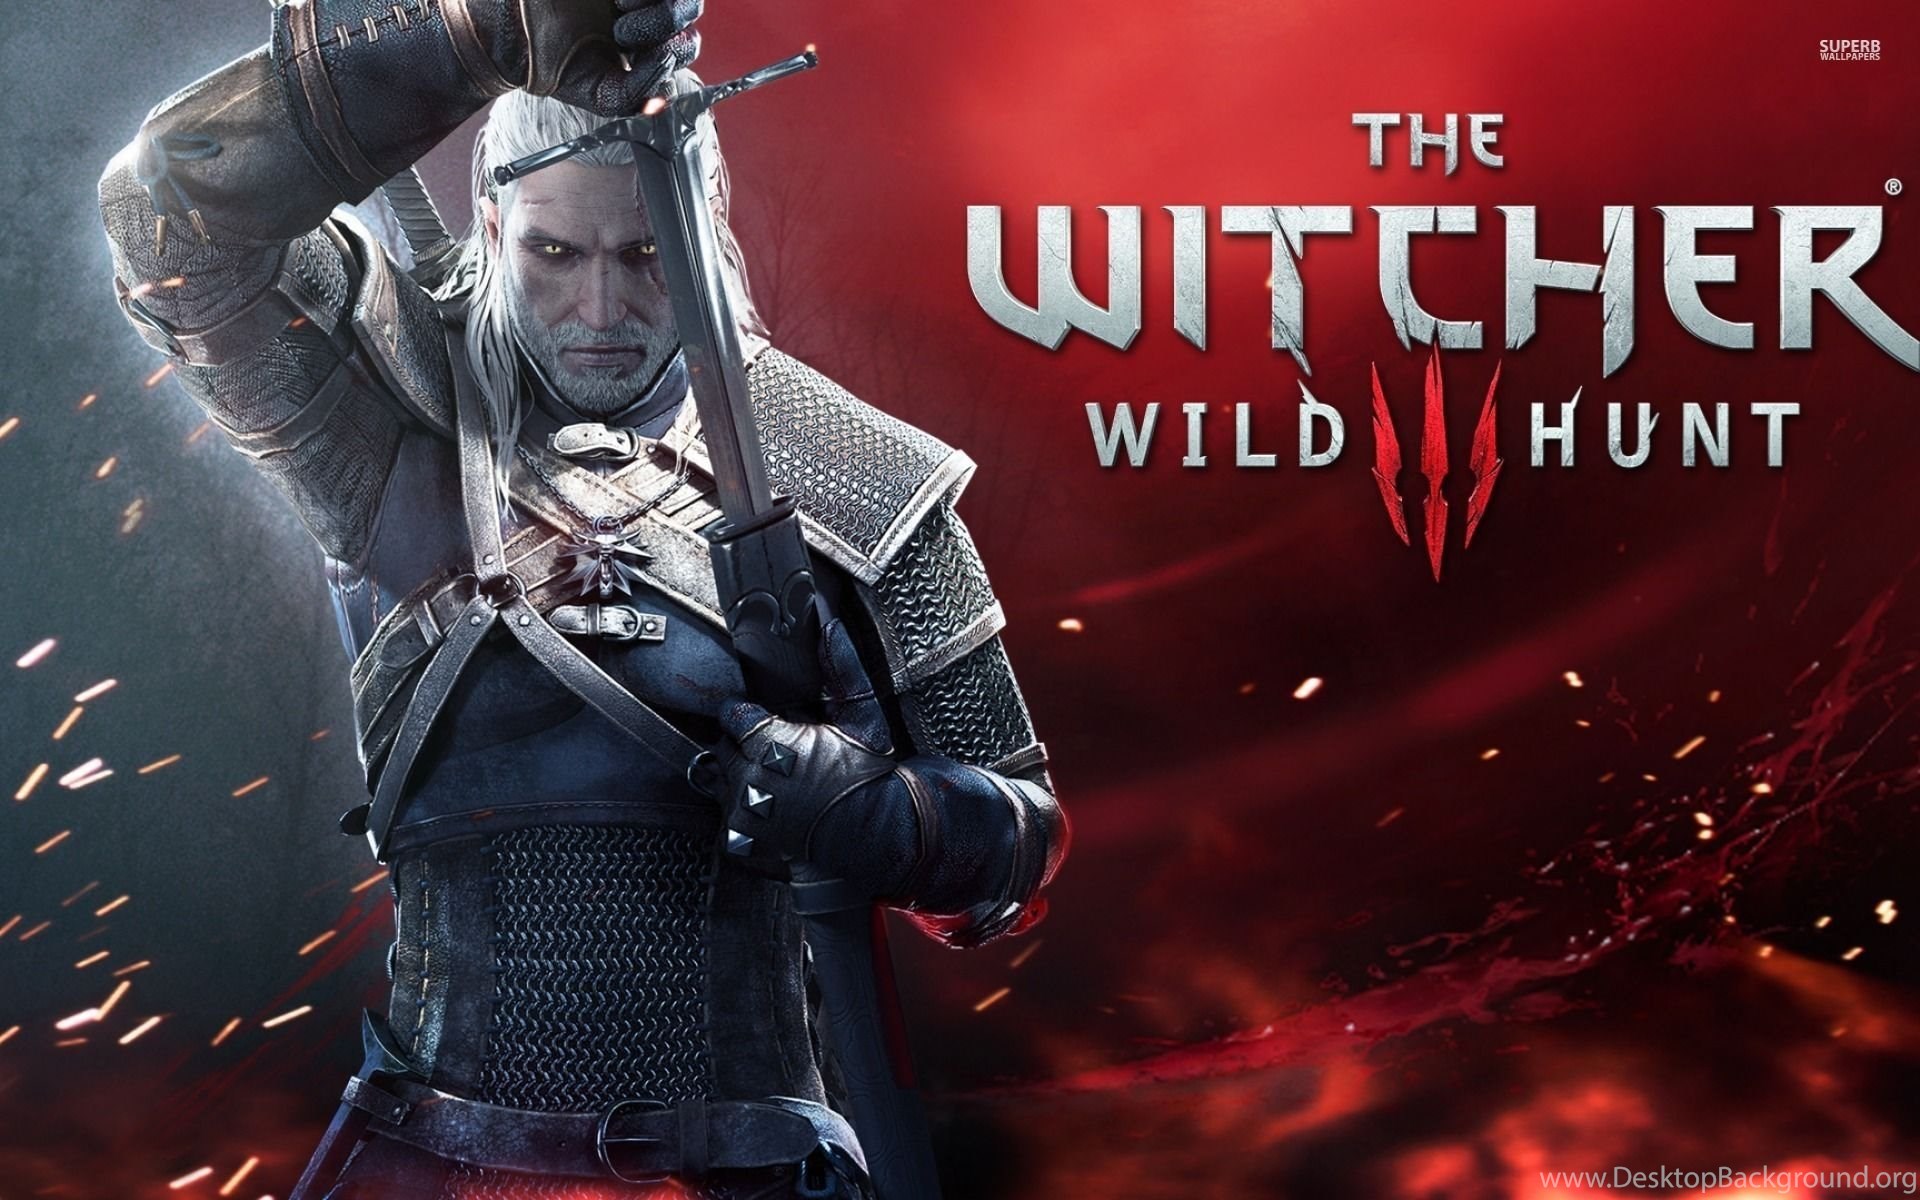 The Witcher 3 Wild Hunt Wallpapers Game Wallpapers Desktop Background